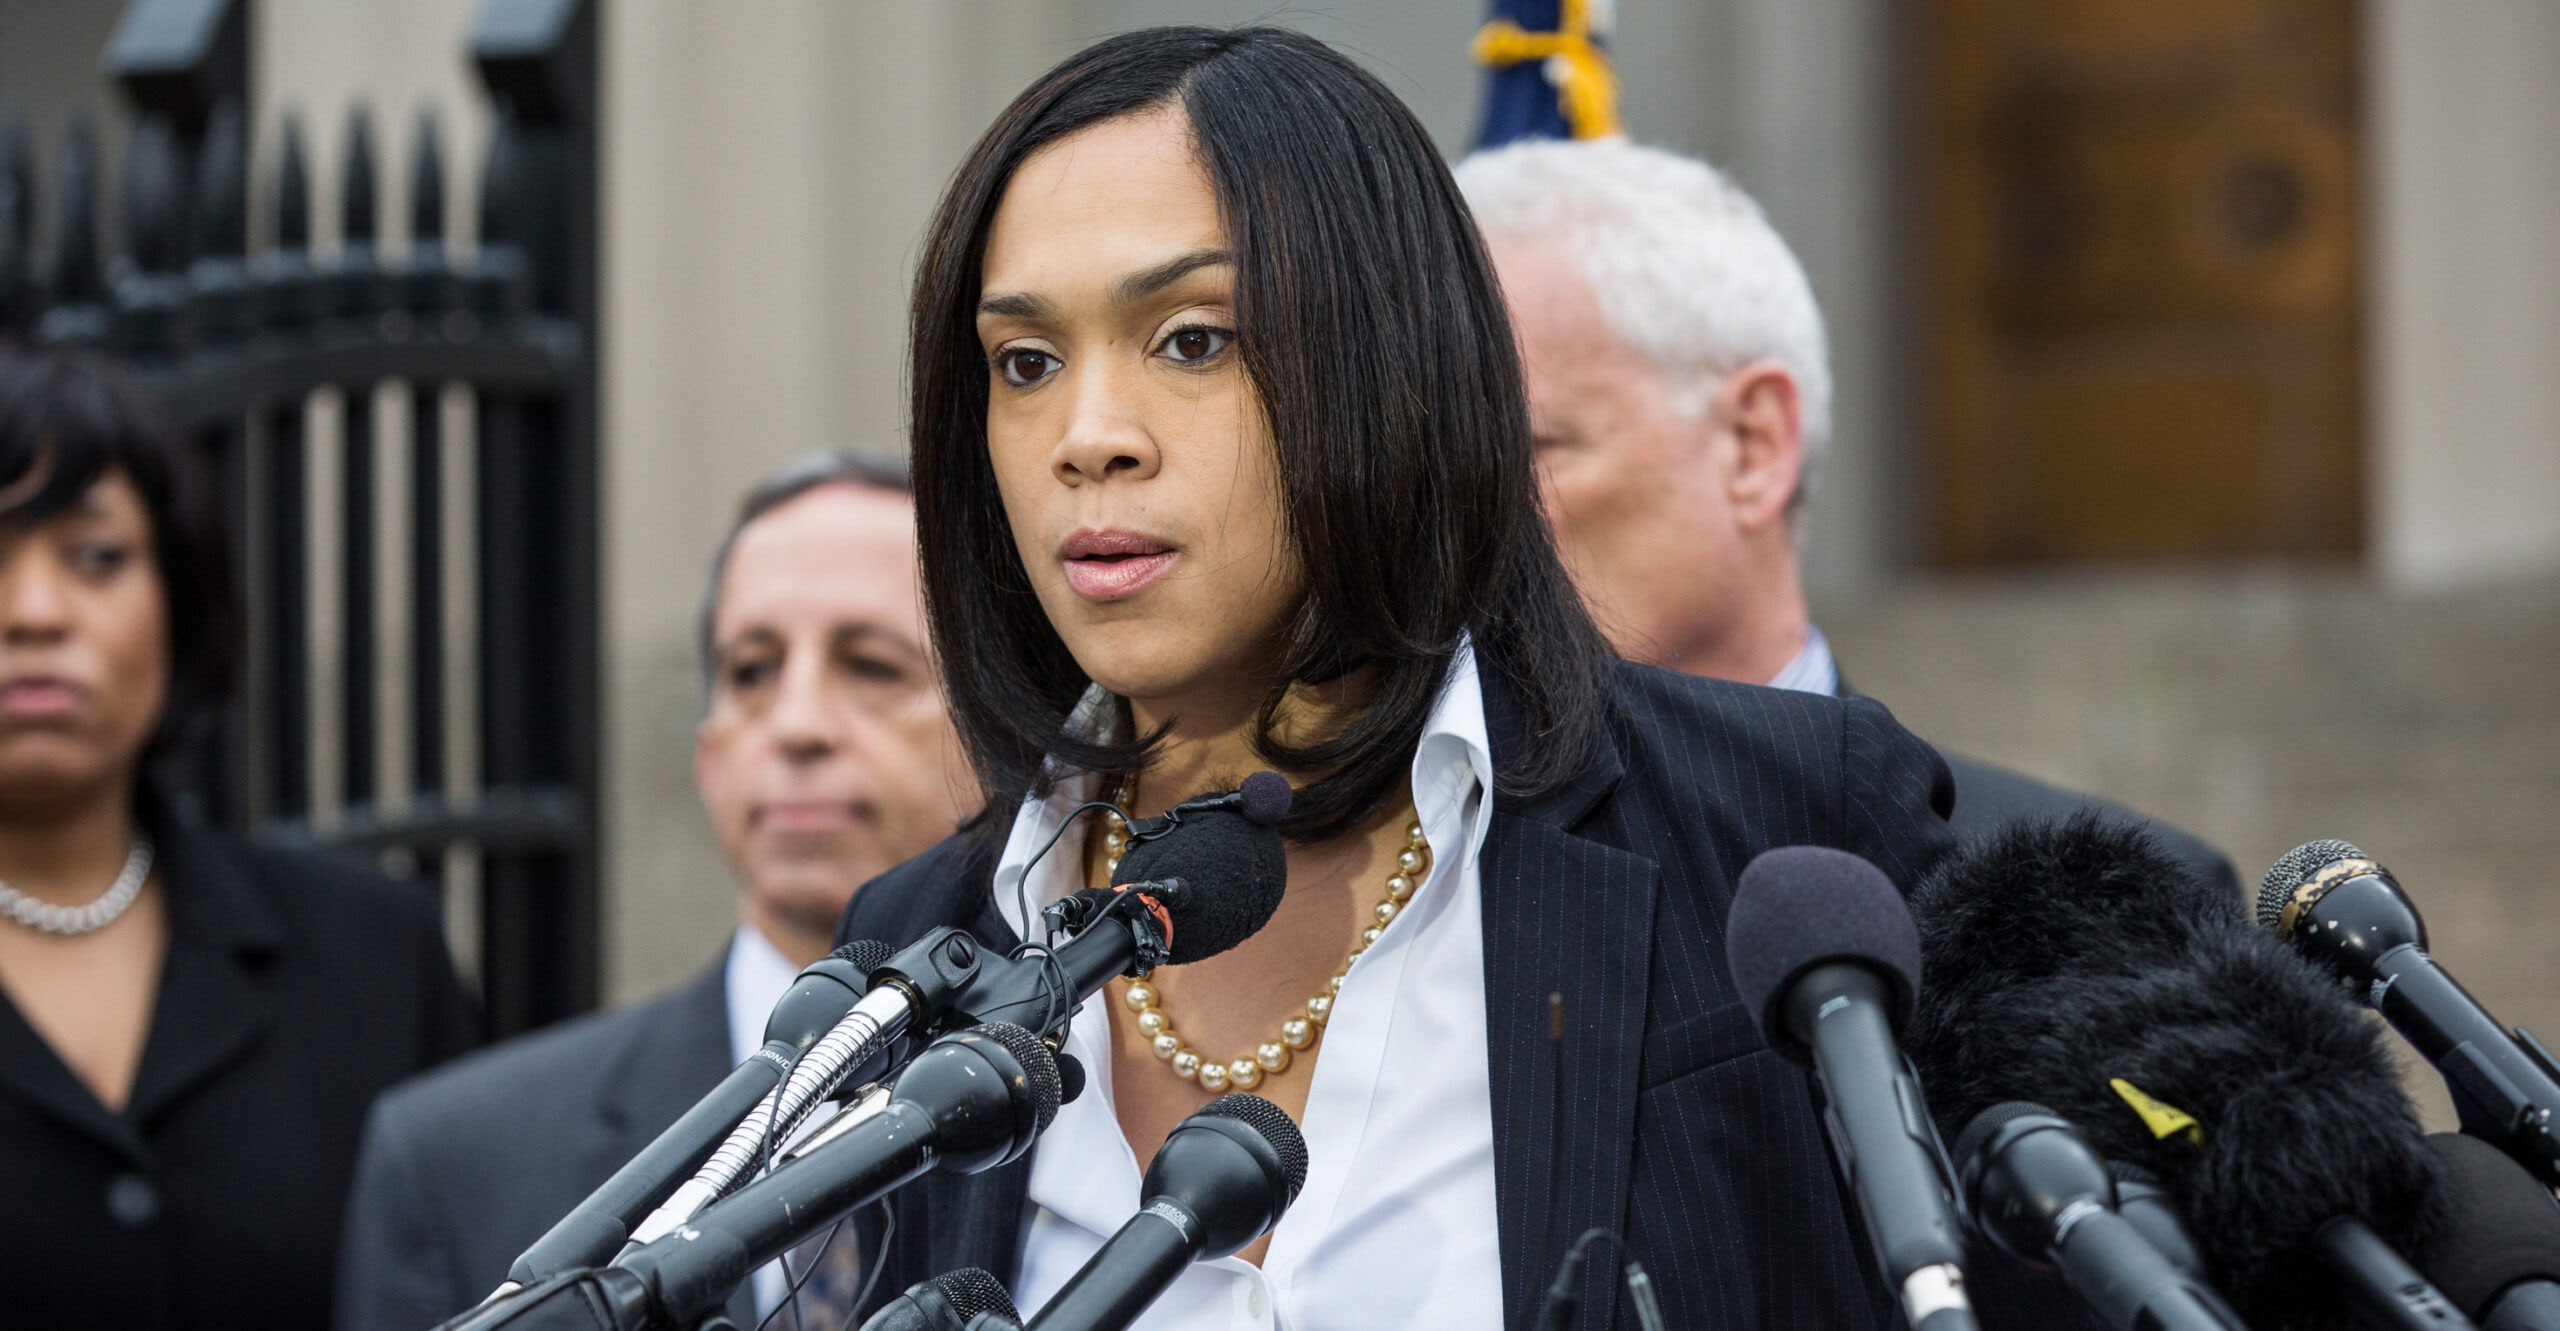 Baltimore’s Rogue Prosecutor Mosby Facing 3 Probes of Official Duties, Travel, Gifts